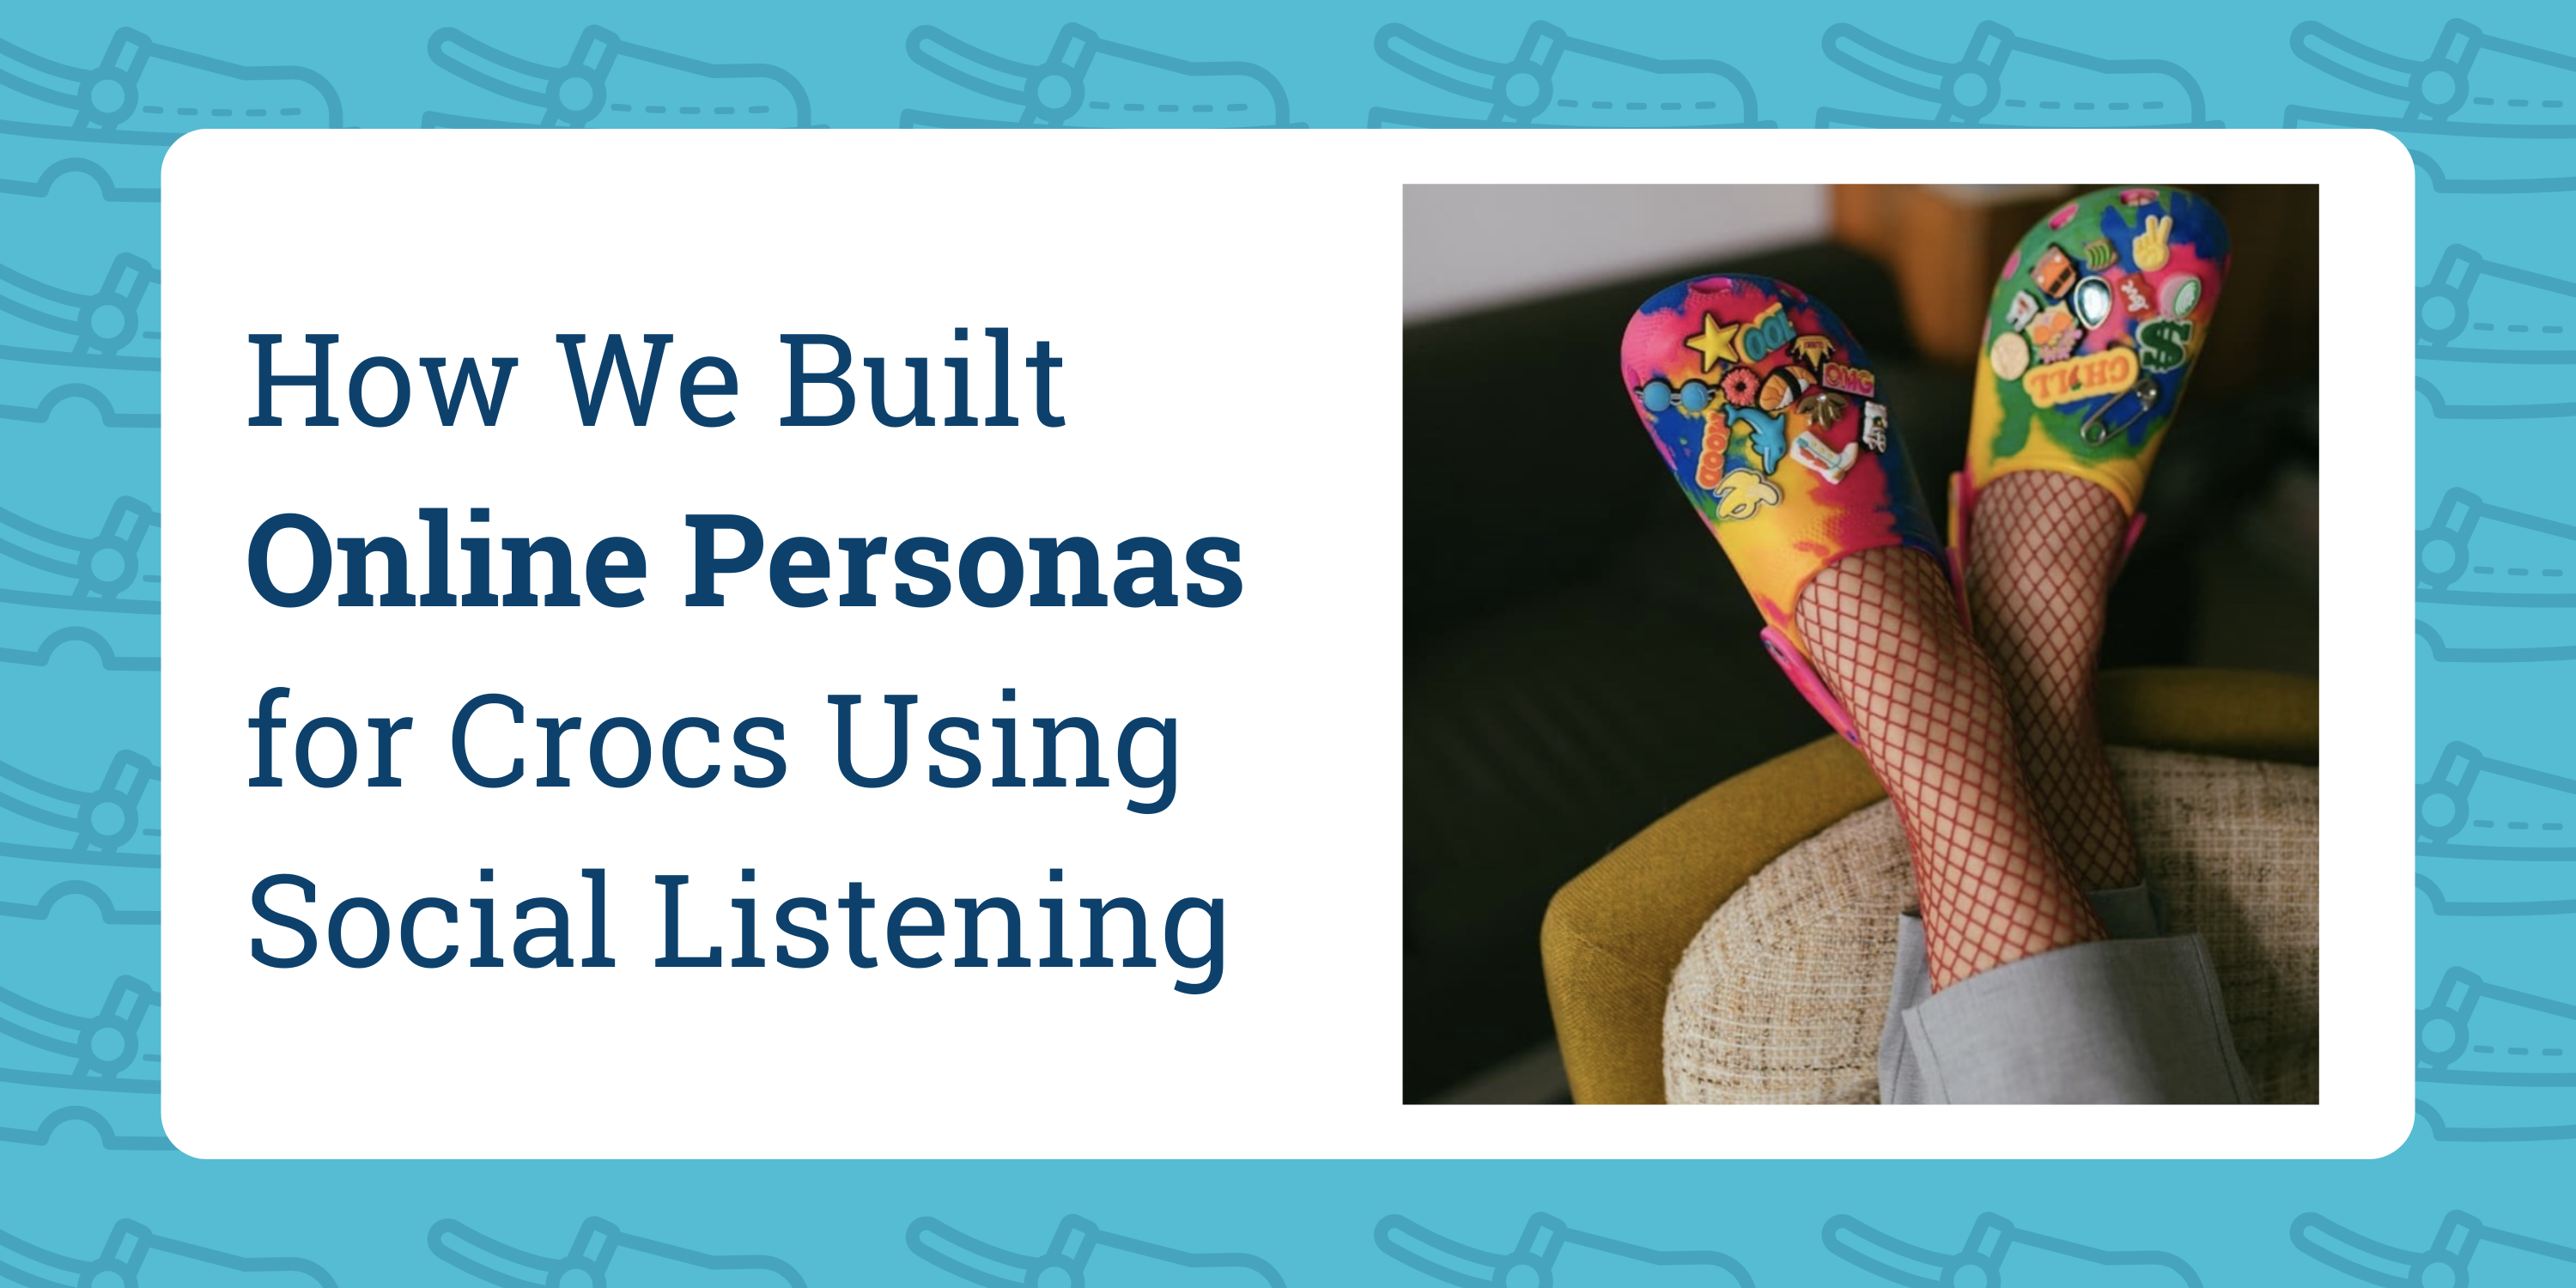 How We Built Audience Personas for Crocs Using Social Listening